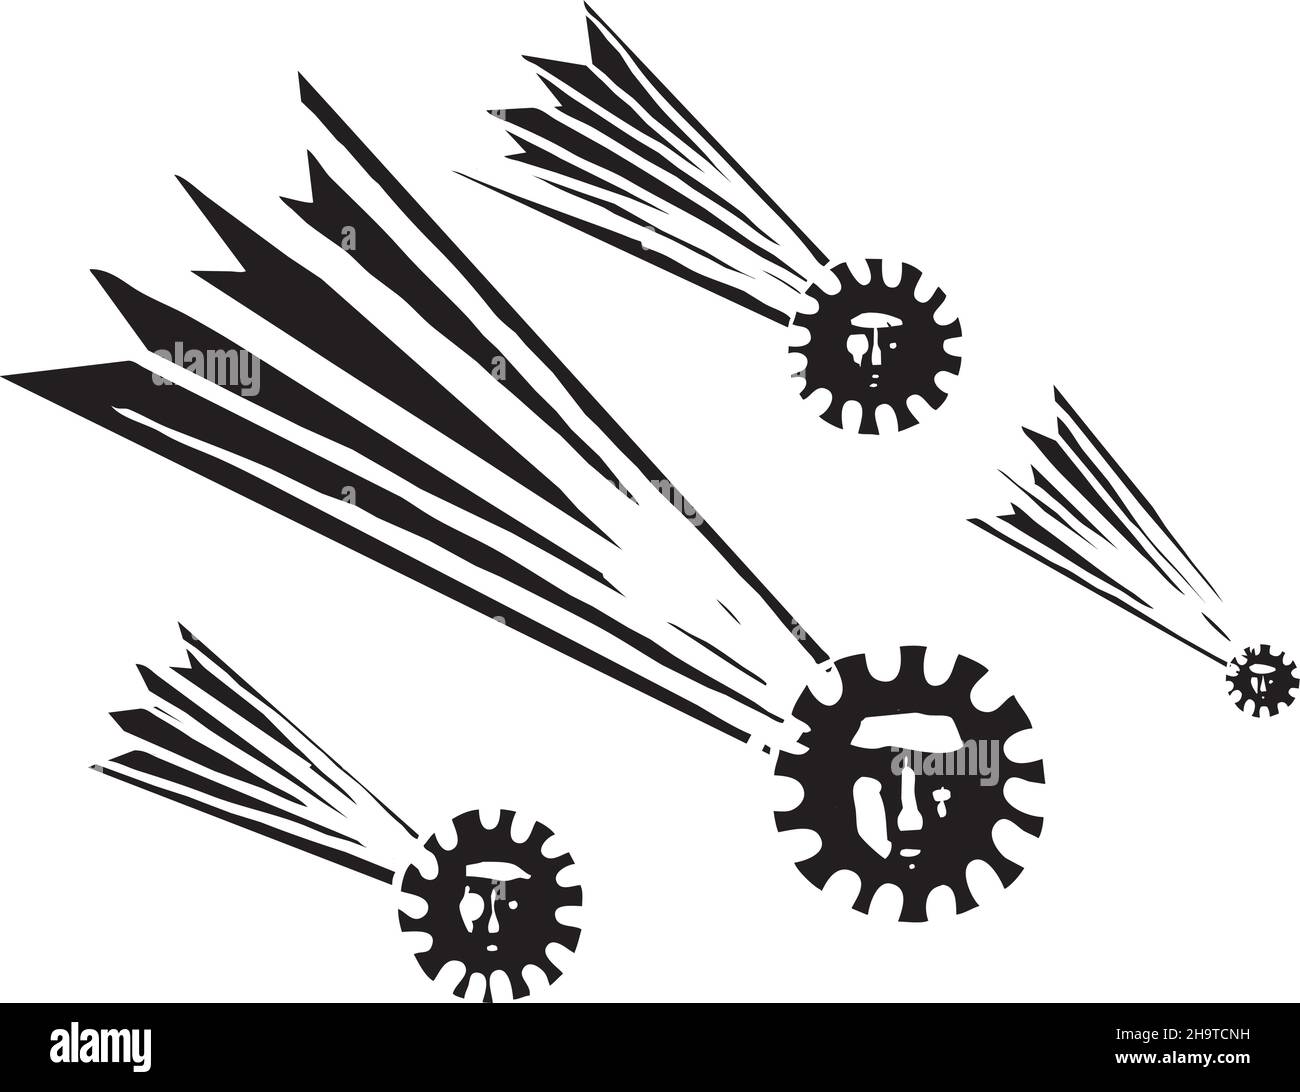 Woodcut expressionist style illustration of comets that look like covid pandemic spores over the earth Stock Vector